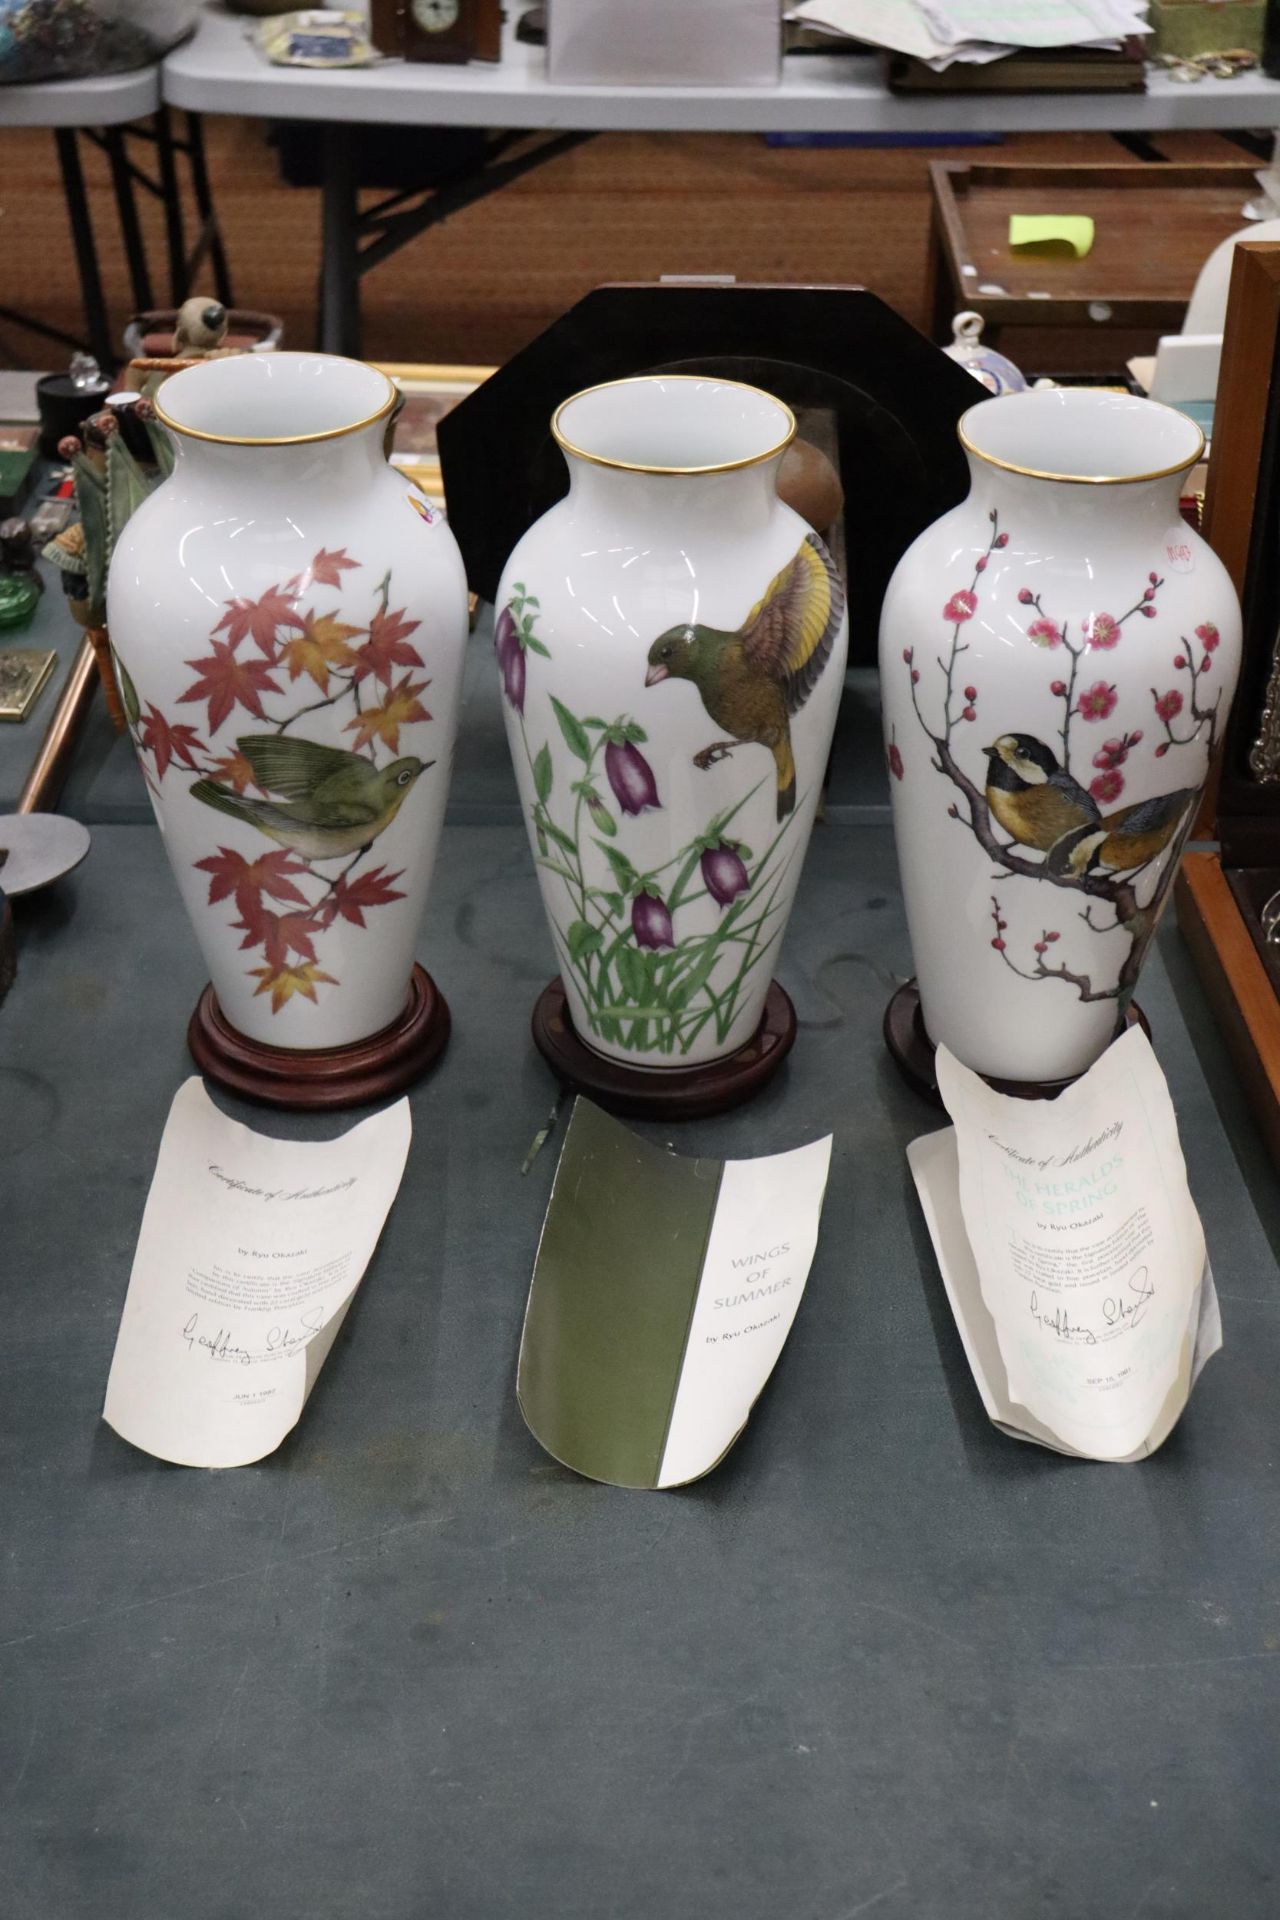 THREE LARGE FRANKLIN PORCELAIN VASES WITH JAPANESE CHARACTERS TO BASE AND WOODEN STANDS, THE HERALDS - Image 2 of 7